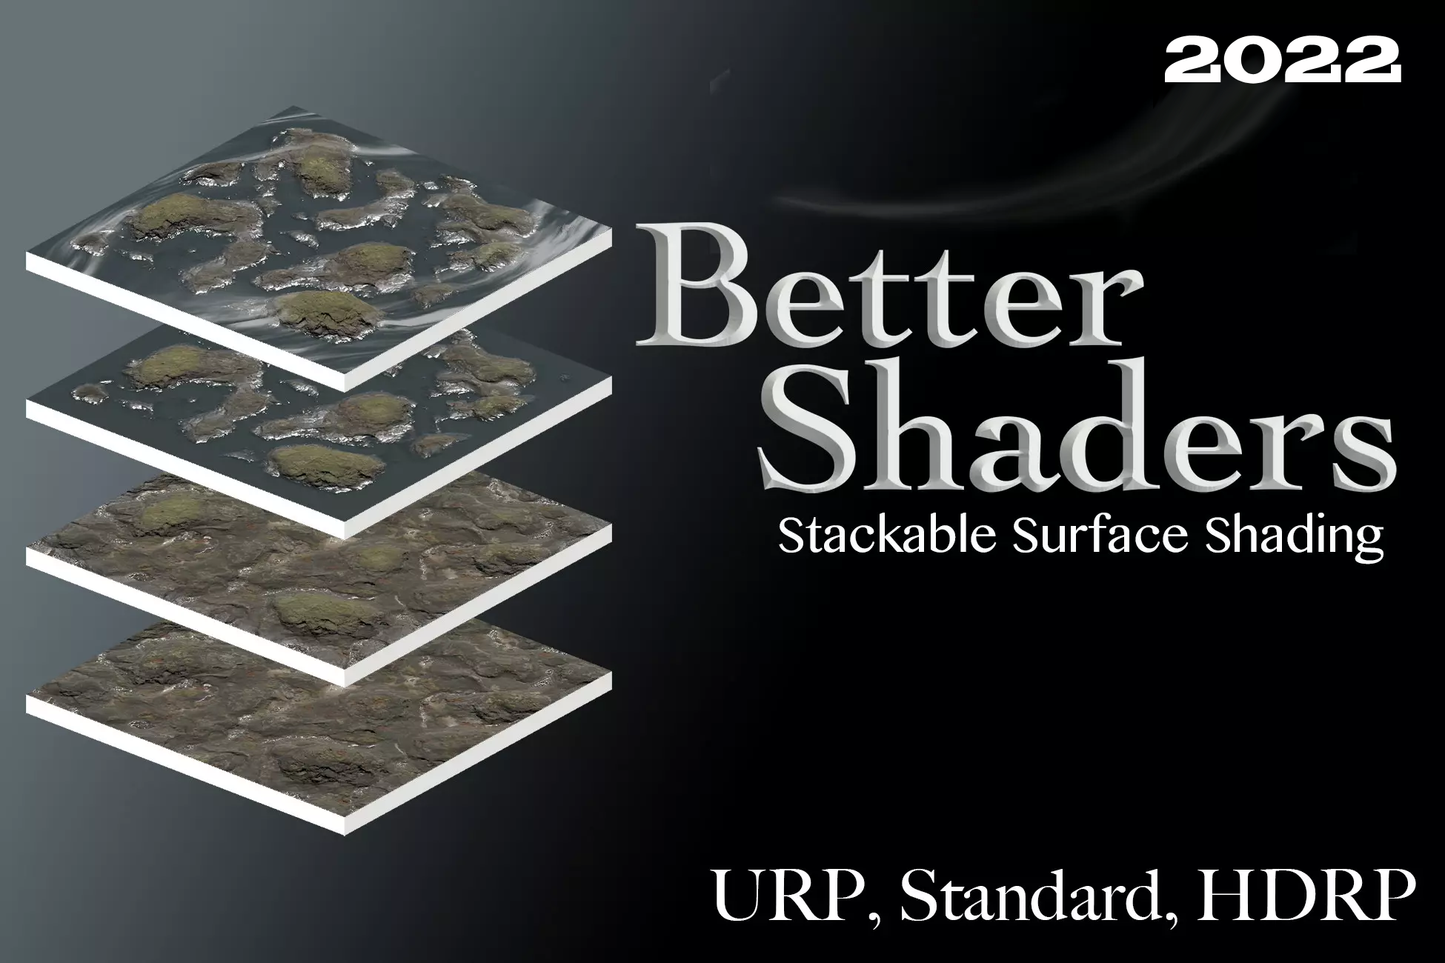 Better Shaders 2022